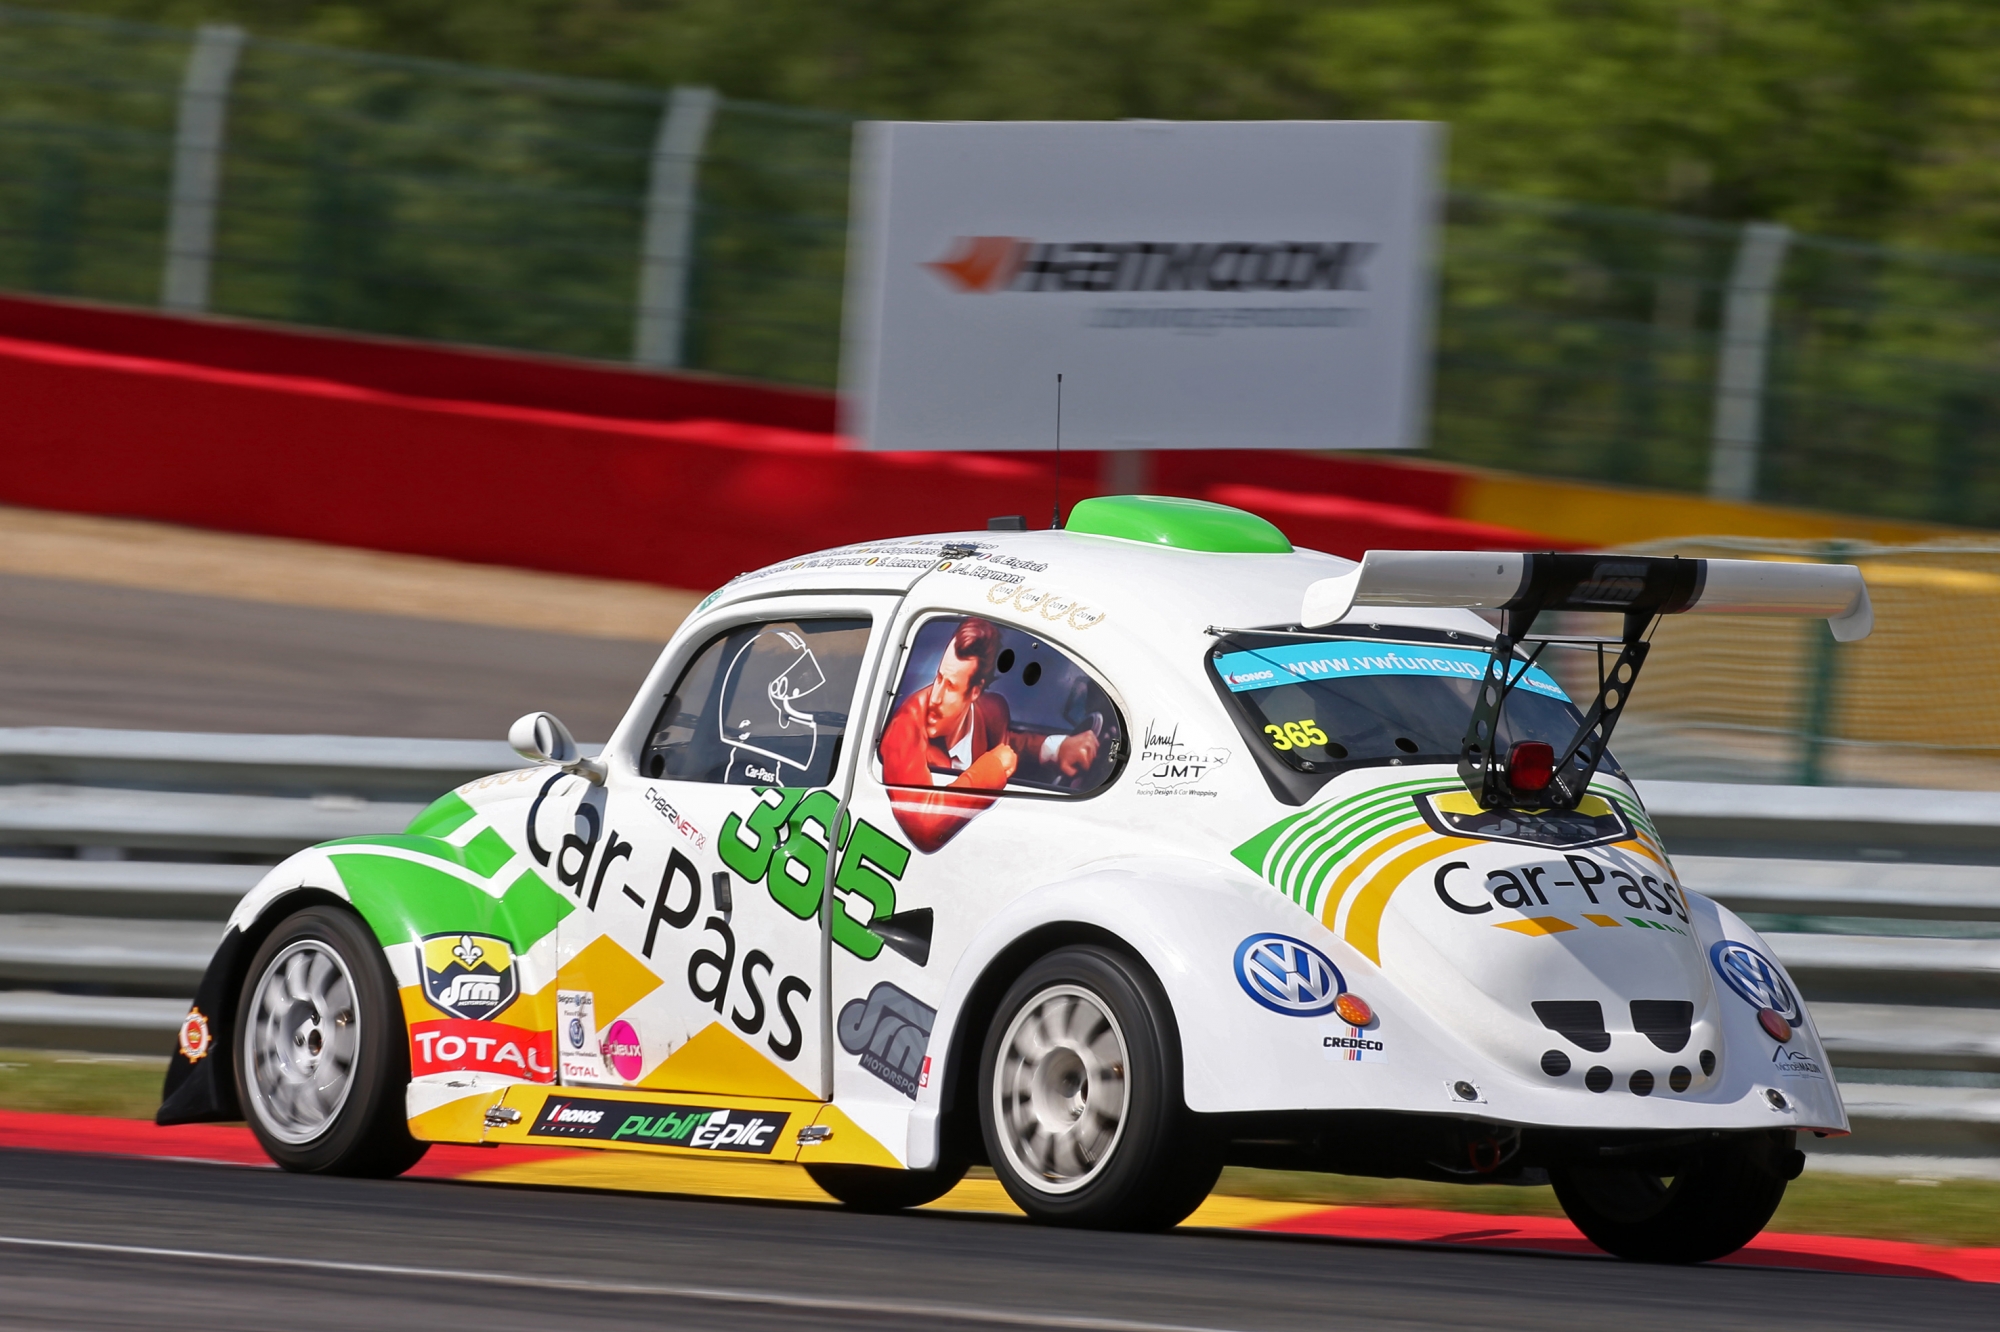 image 1 - Mini-interview: Philippe Reynens (#365 Car Pass by DRM)